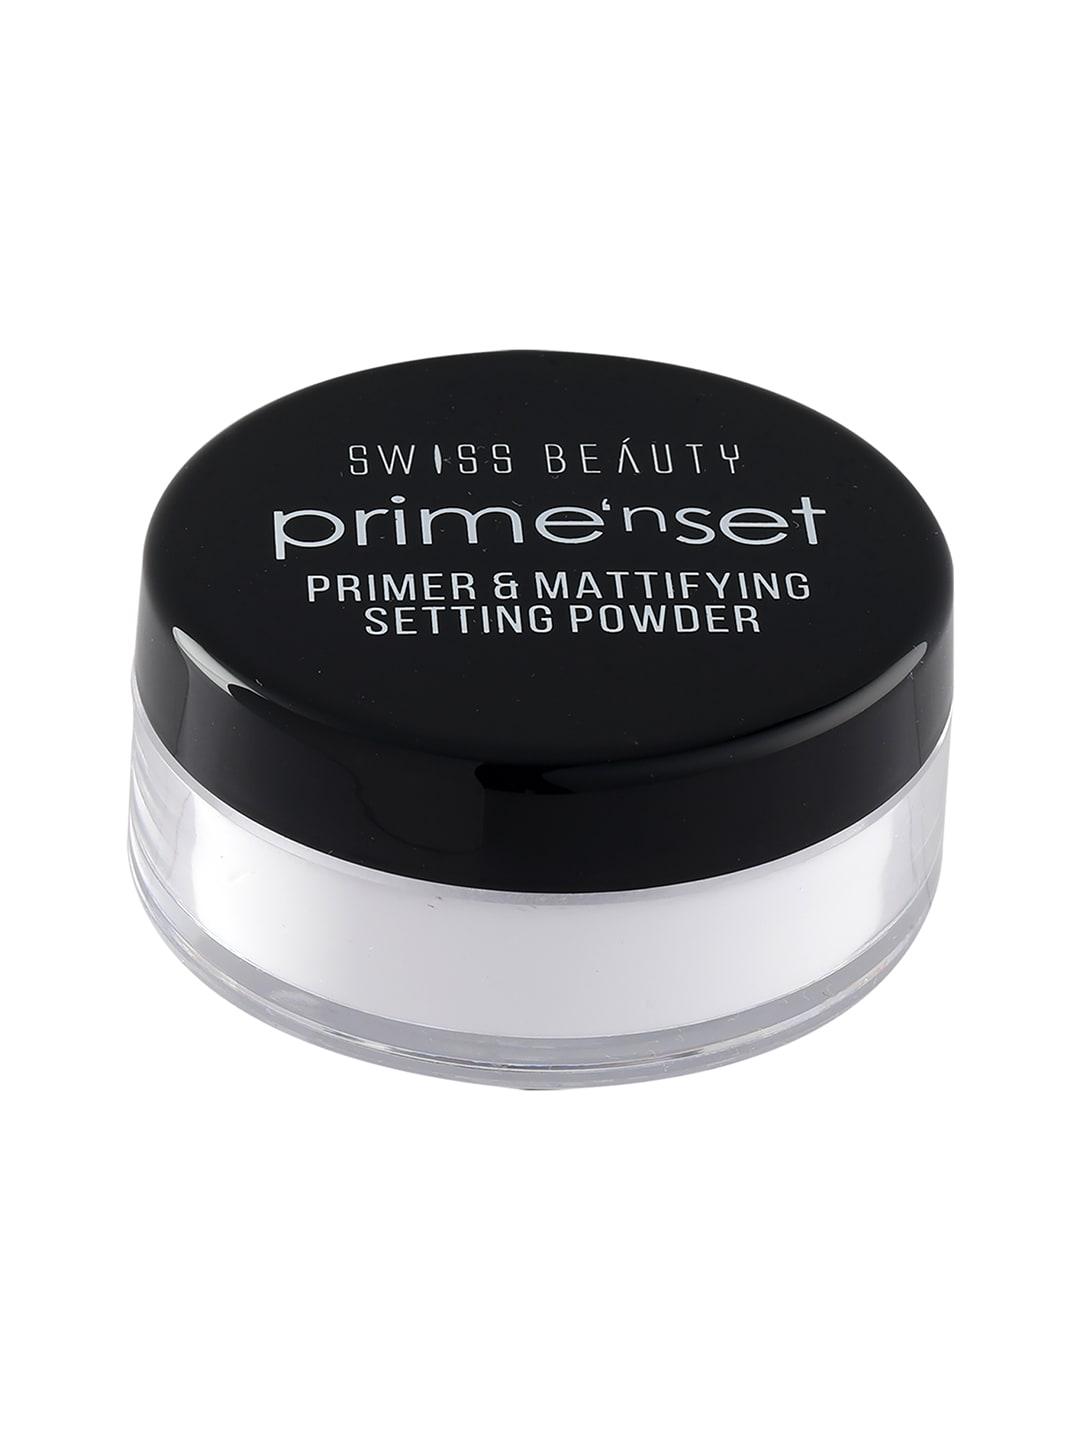 swiss-beauty-prime'nset-primer-&-mattifying-setting-powder-with-spf15---10g